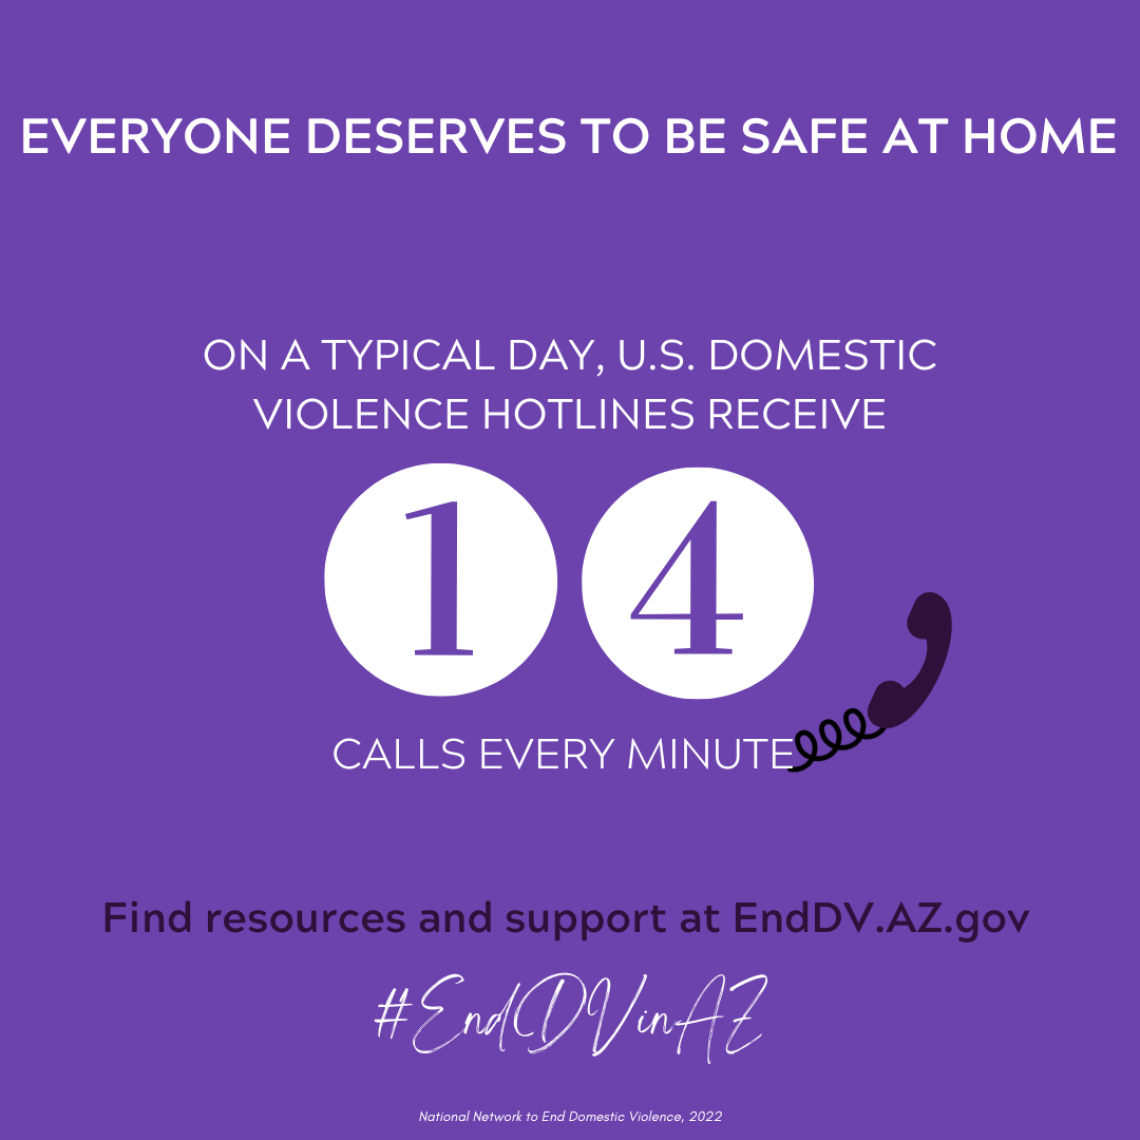 Everyone deserves to be safe at home.